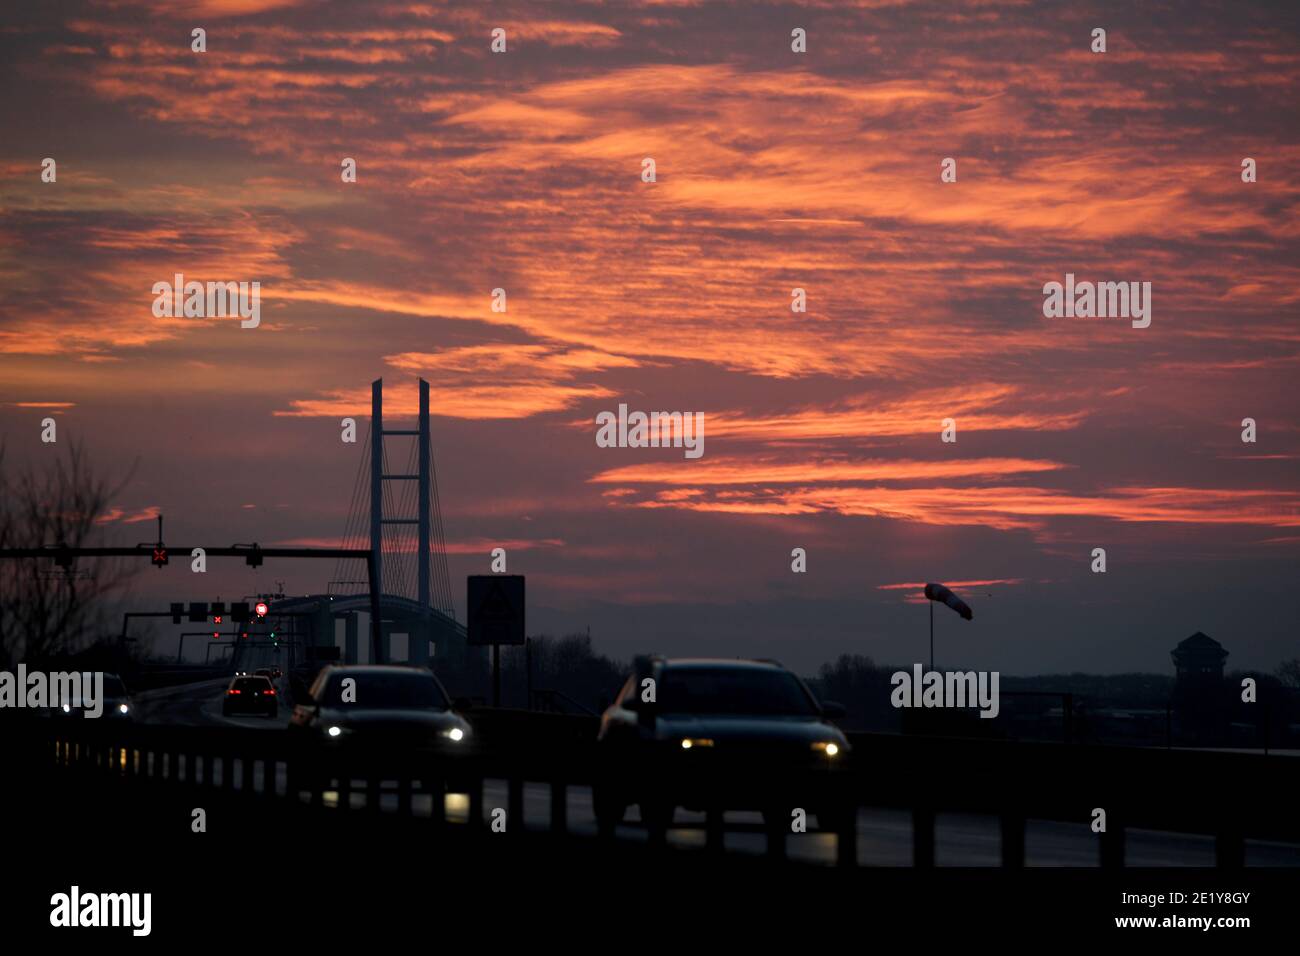 10 January 2021, Mecklenburg-Western Pomerania, Altefähr: The sky above the silhouette of the Rügenbrücke B96, taken from the island of Rügen, is colourful at sunset. Photo: Stefan Sauer/dpa-Zentralbild/ZB Stock Photo